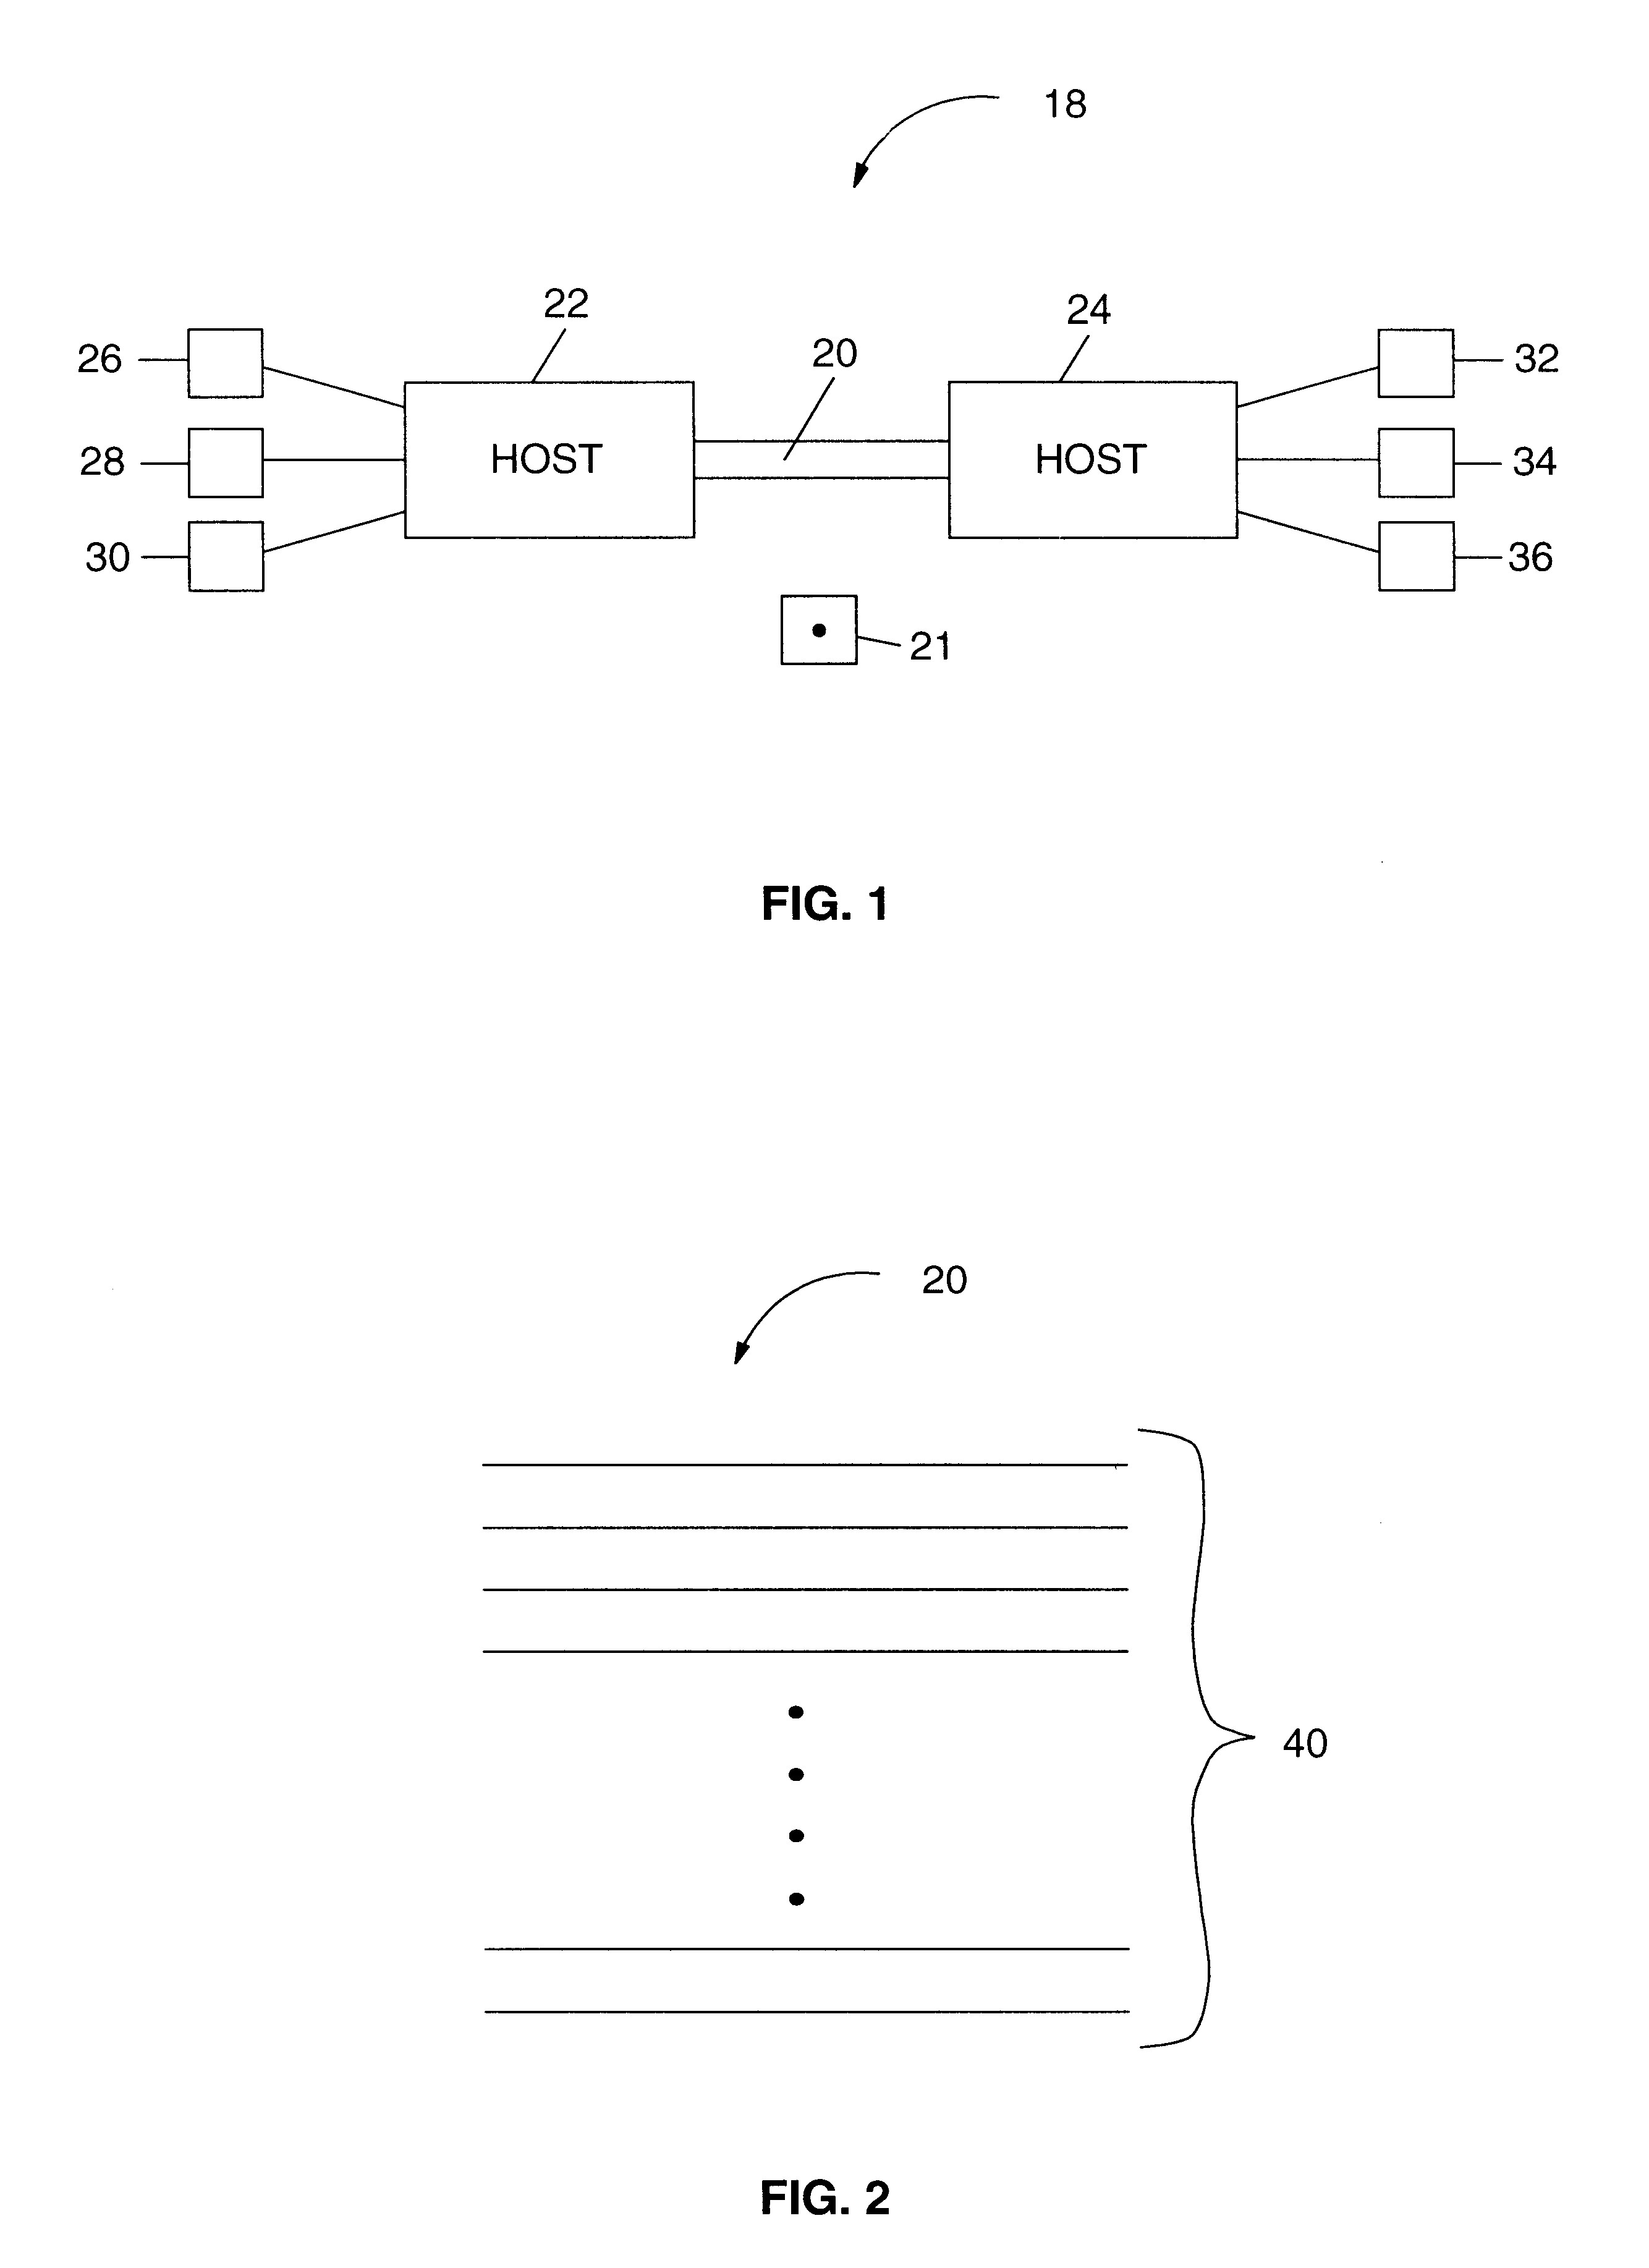 Self-tuning link aggregation system